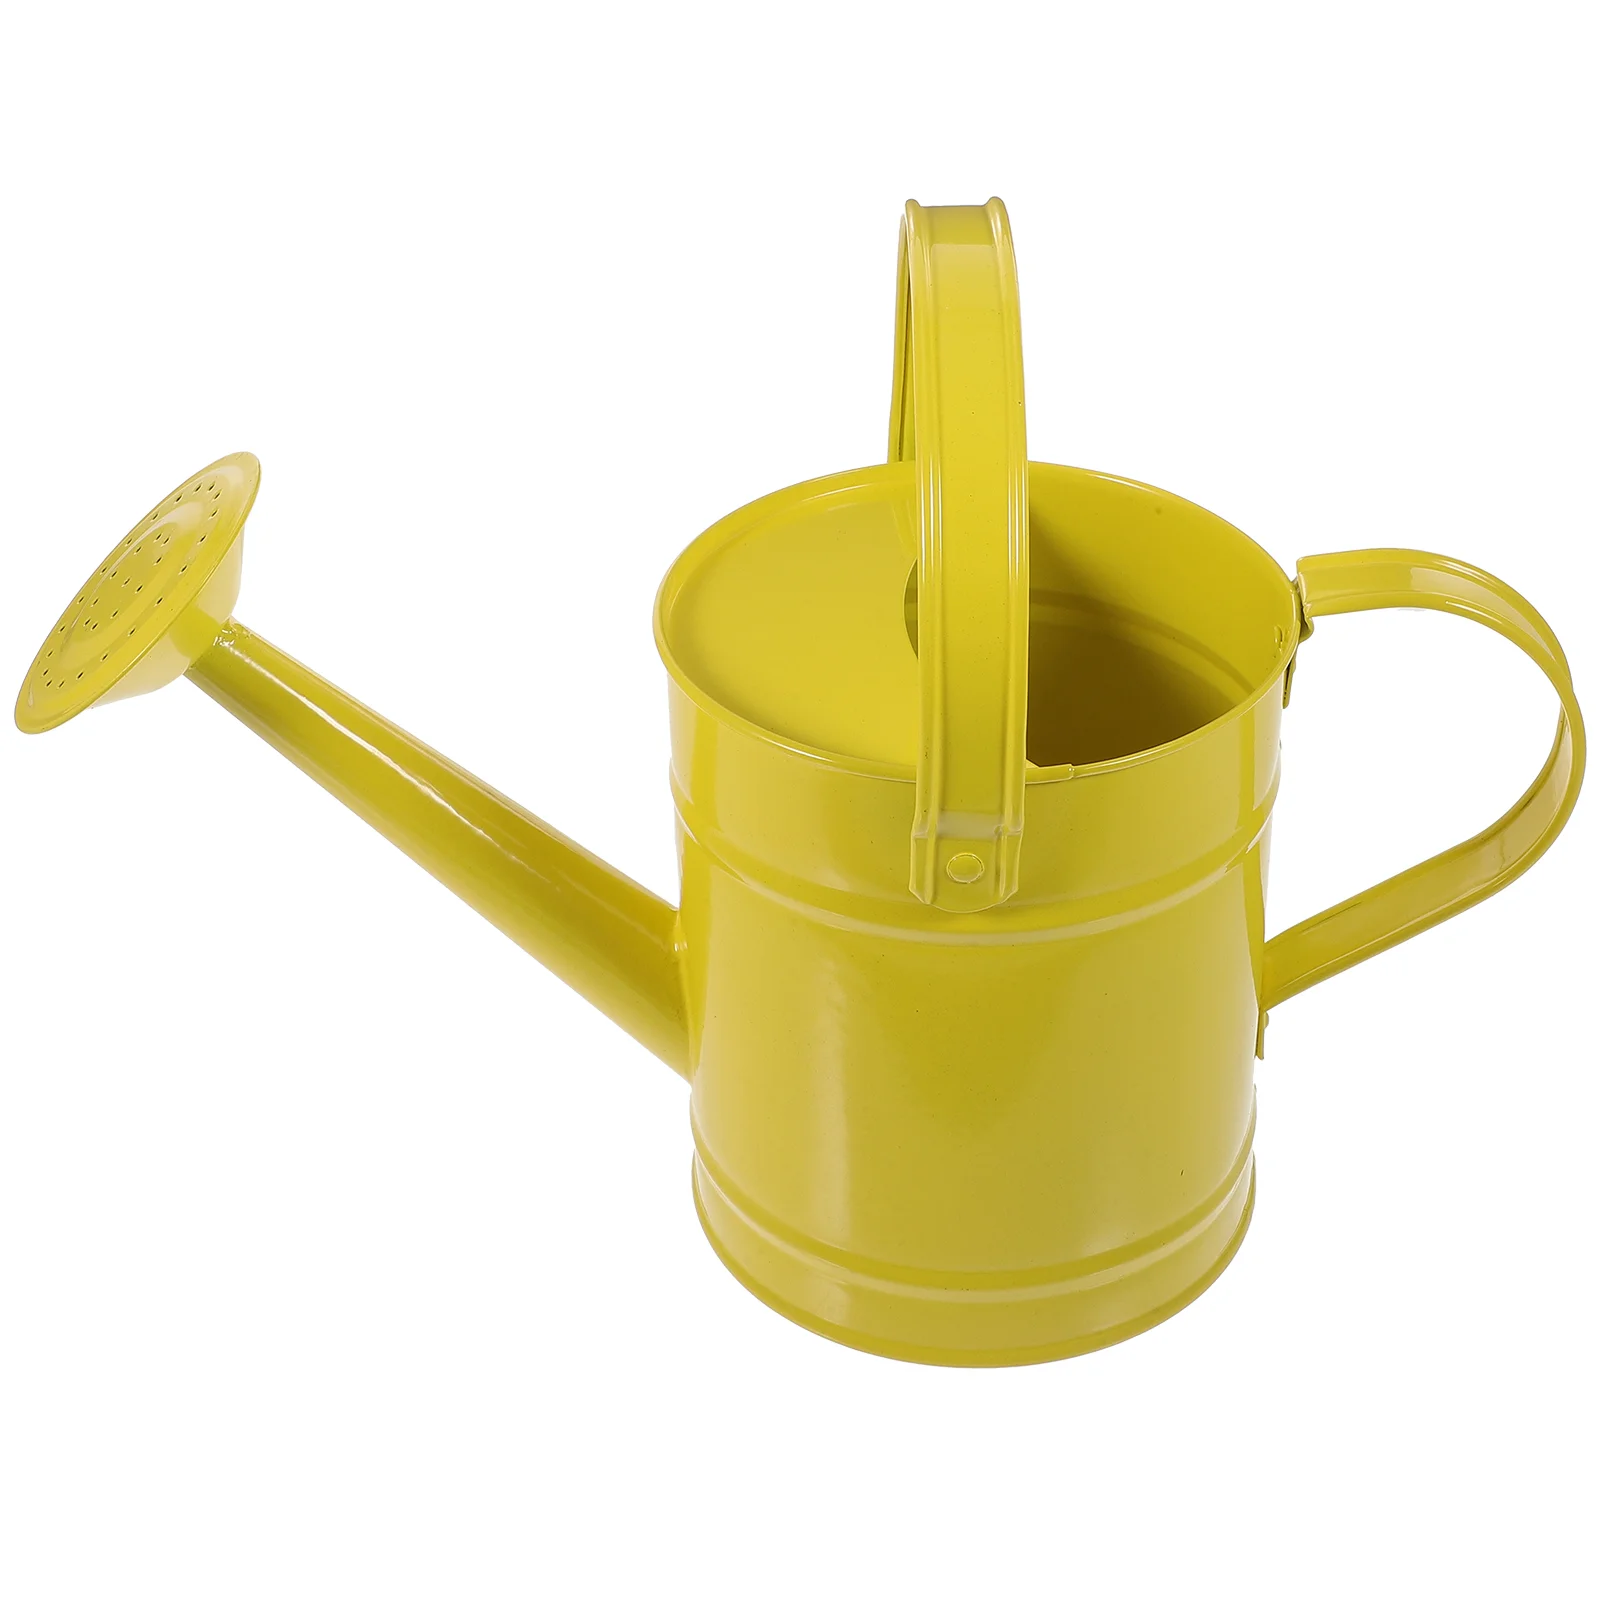 

Gardening Watering Can Small Sprinklers Bottles Cans Indoor Plants Supplies Bucket Iron Planting Tool Child House